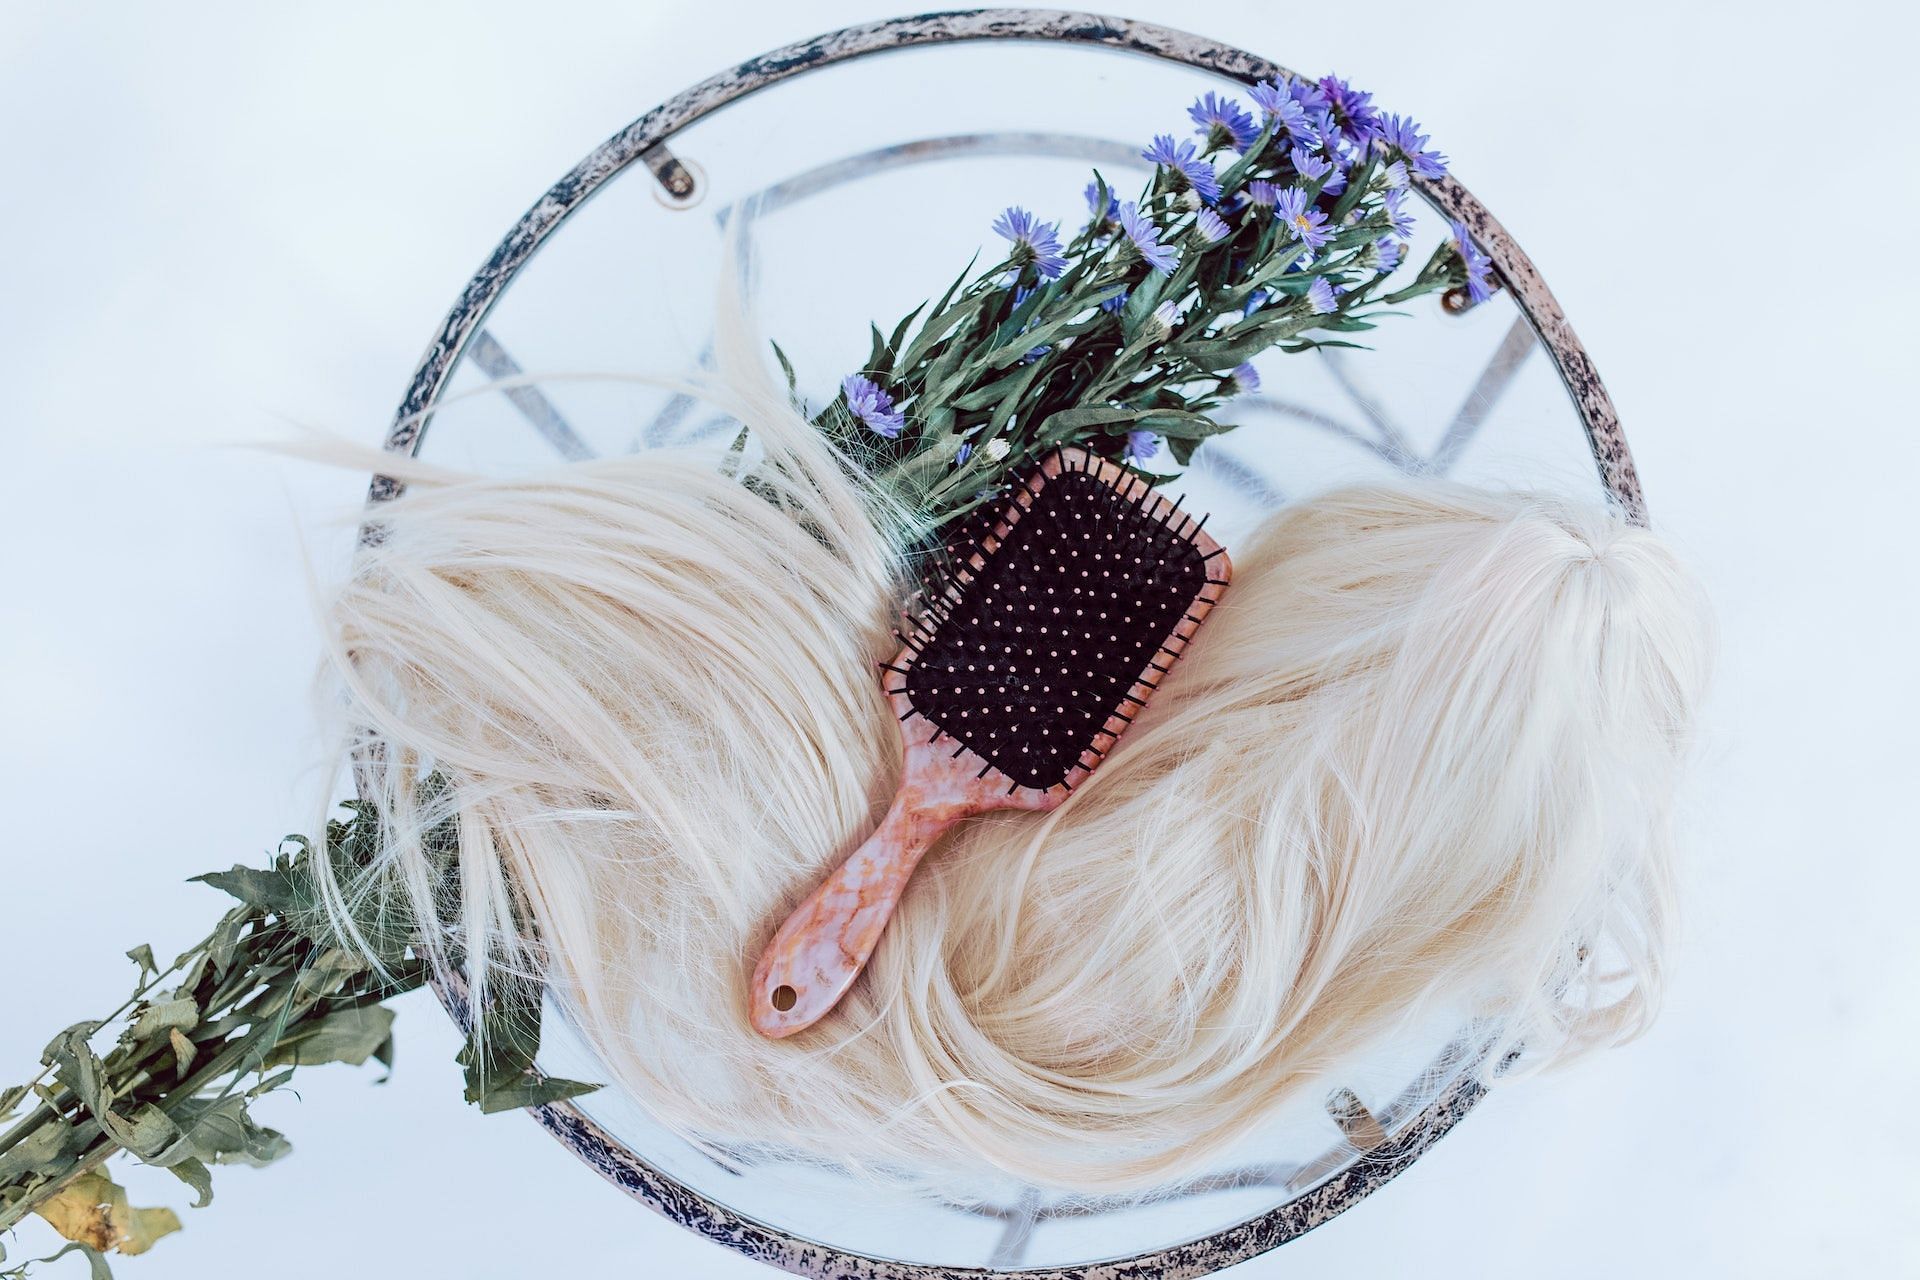 There are several tips for hair regrowth for women. (Photo via Pexels/RDNE Stock project)